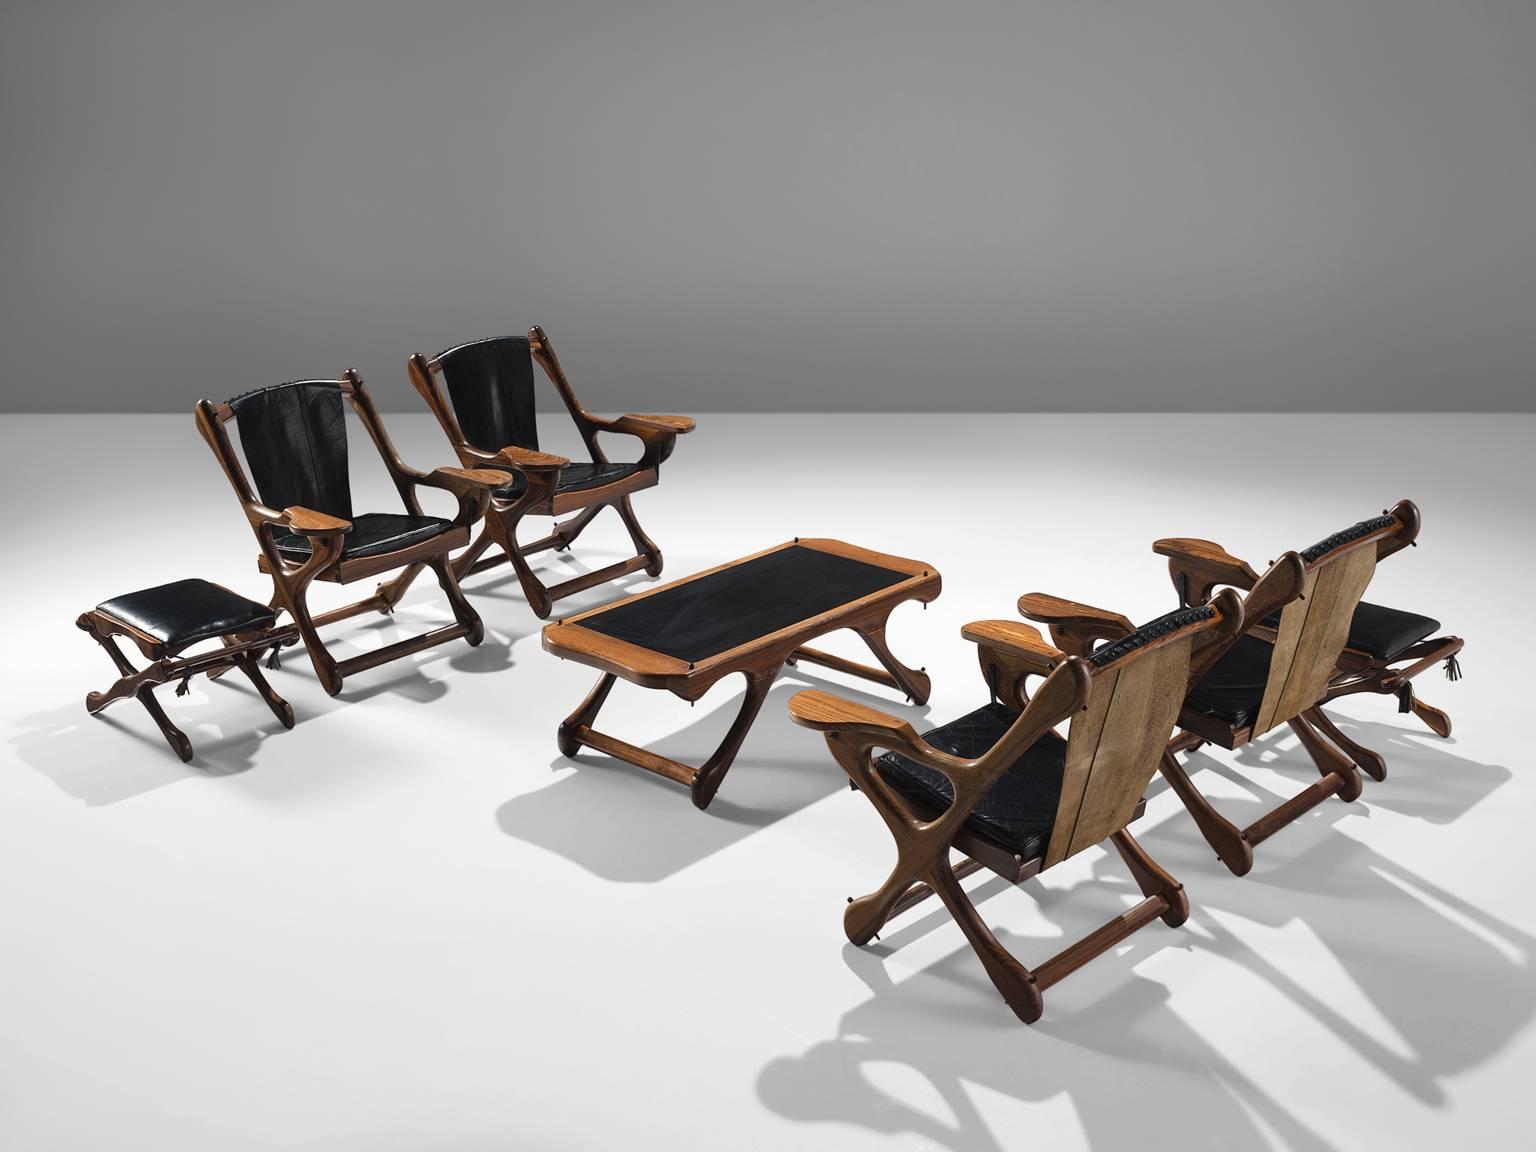 Don S. Shoemaker for Señal Furniture, set of two armchairs, in cocobolo and black leather, Mexico, 1960s. 

This iconic set of four swinger lounge chairs are executed in Cocobolo rosewood and leather.. The chairs are accompanied by a coffee and side